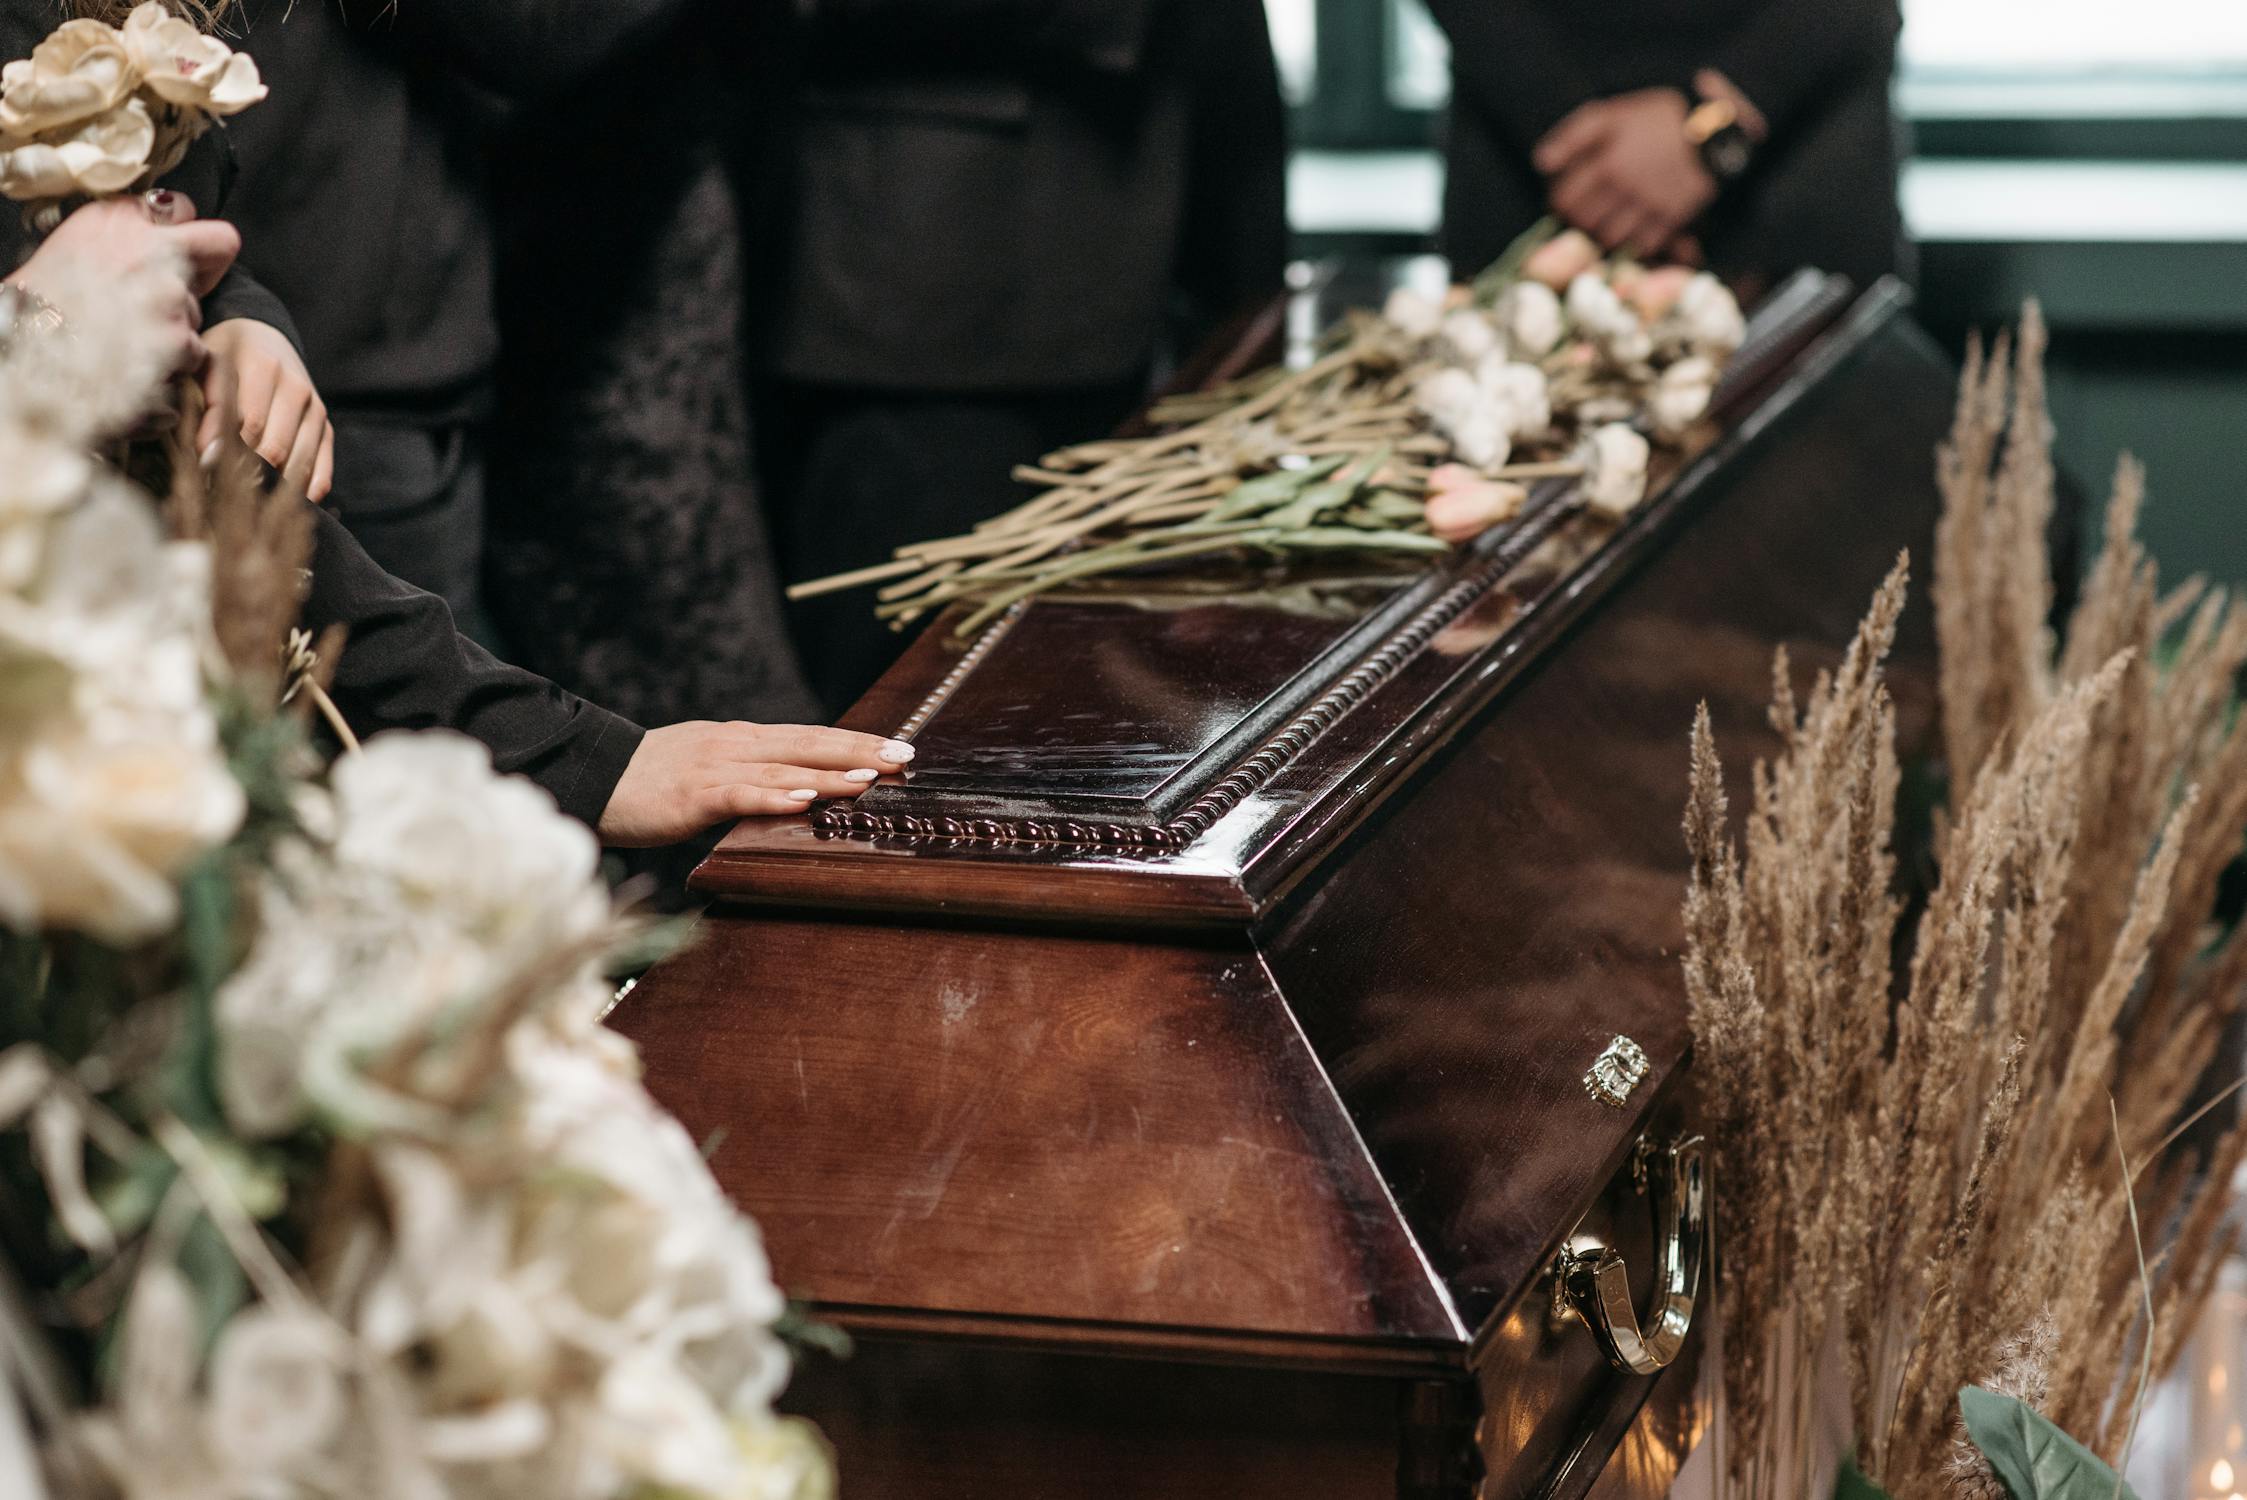 Tips for arranging a funeral